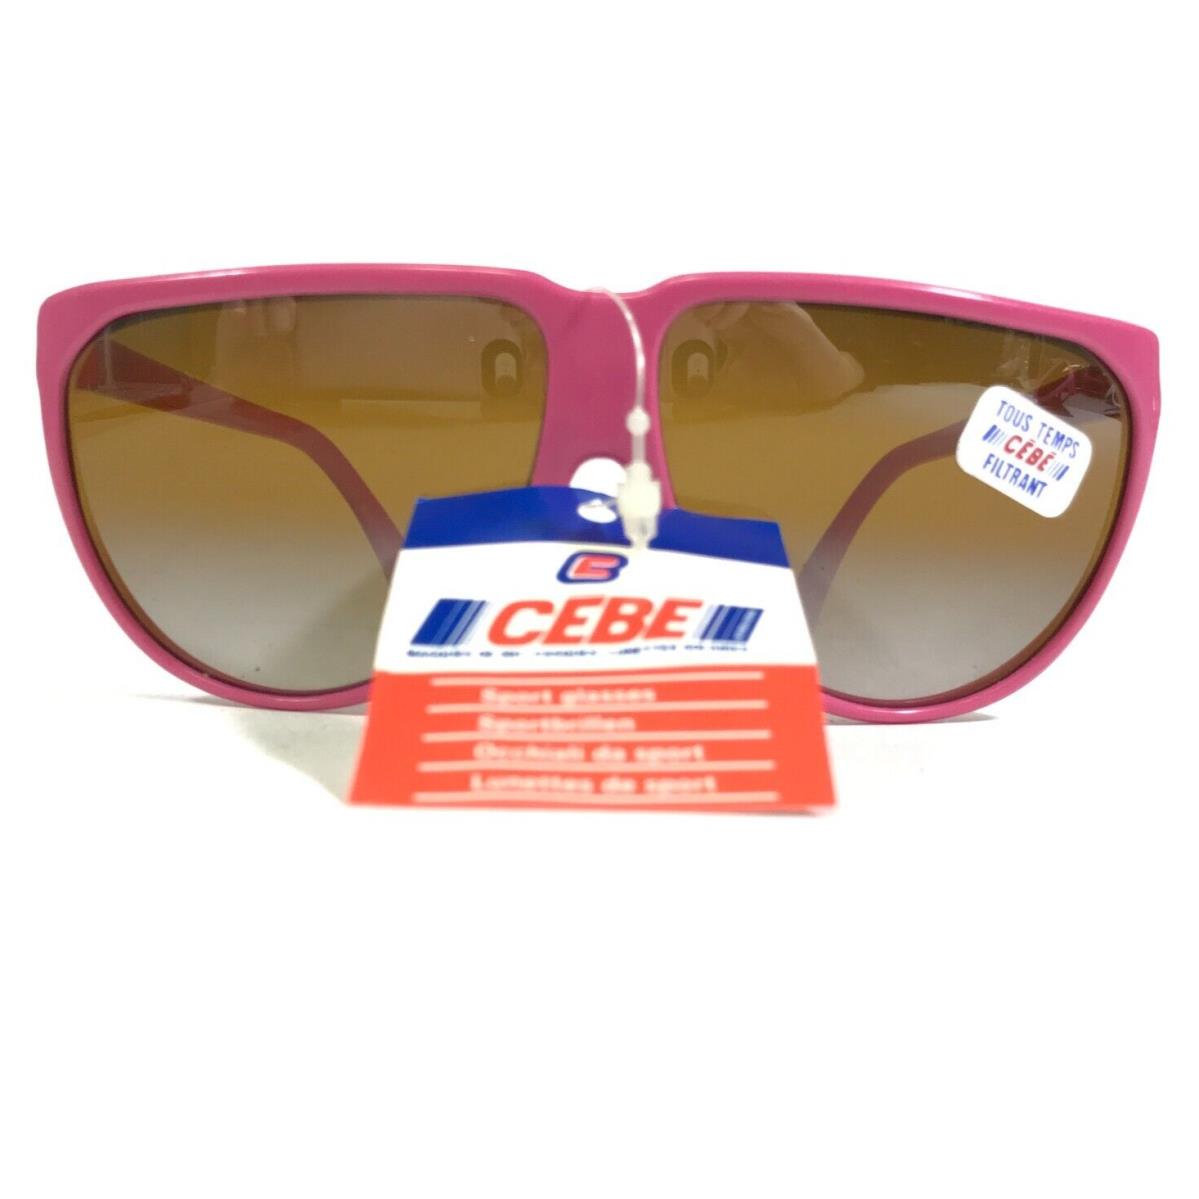 Vintage Cebe Sunglasses Pink Round Frames with Brown Lenses 57-12-125